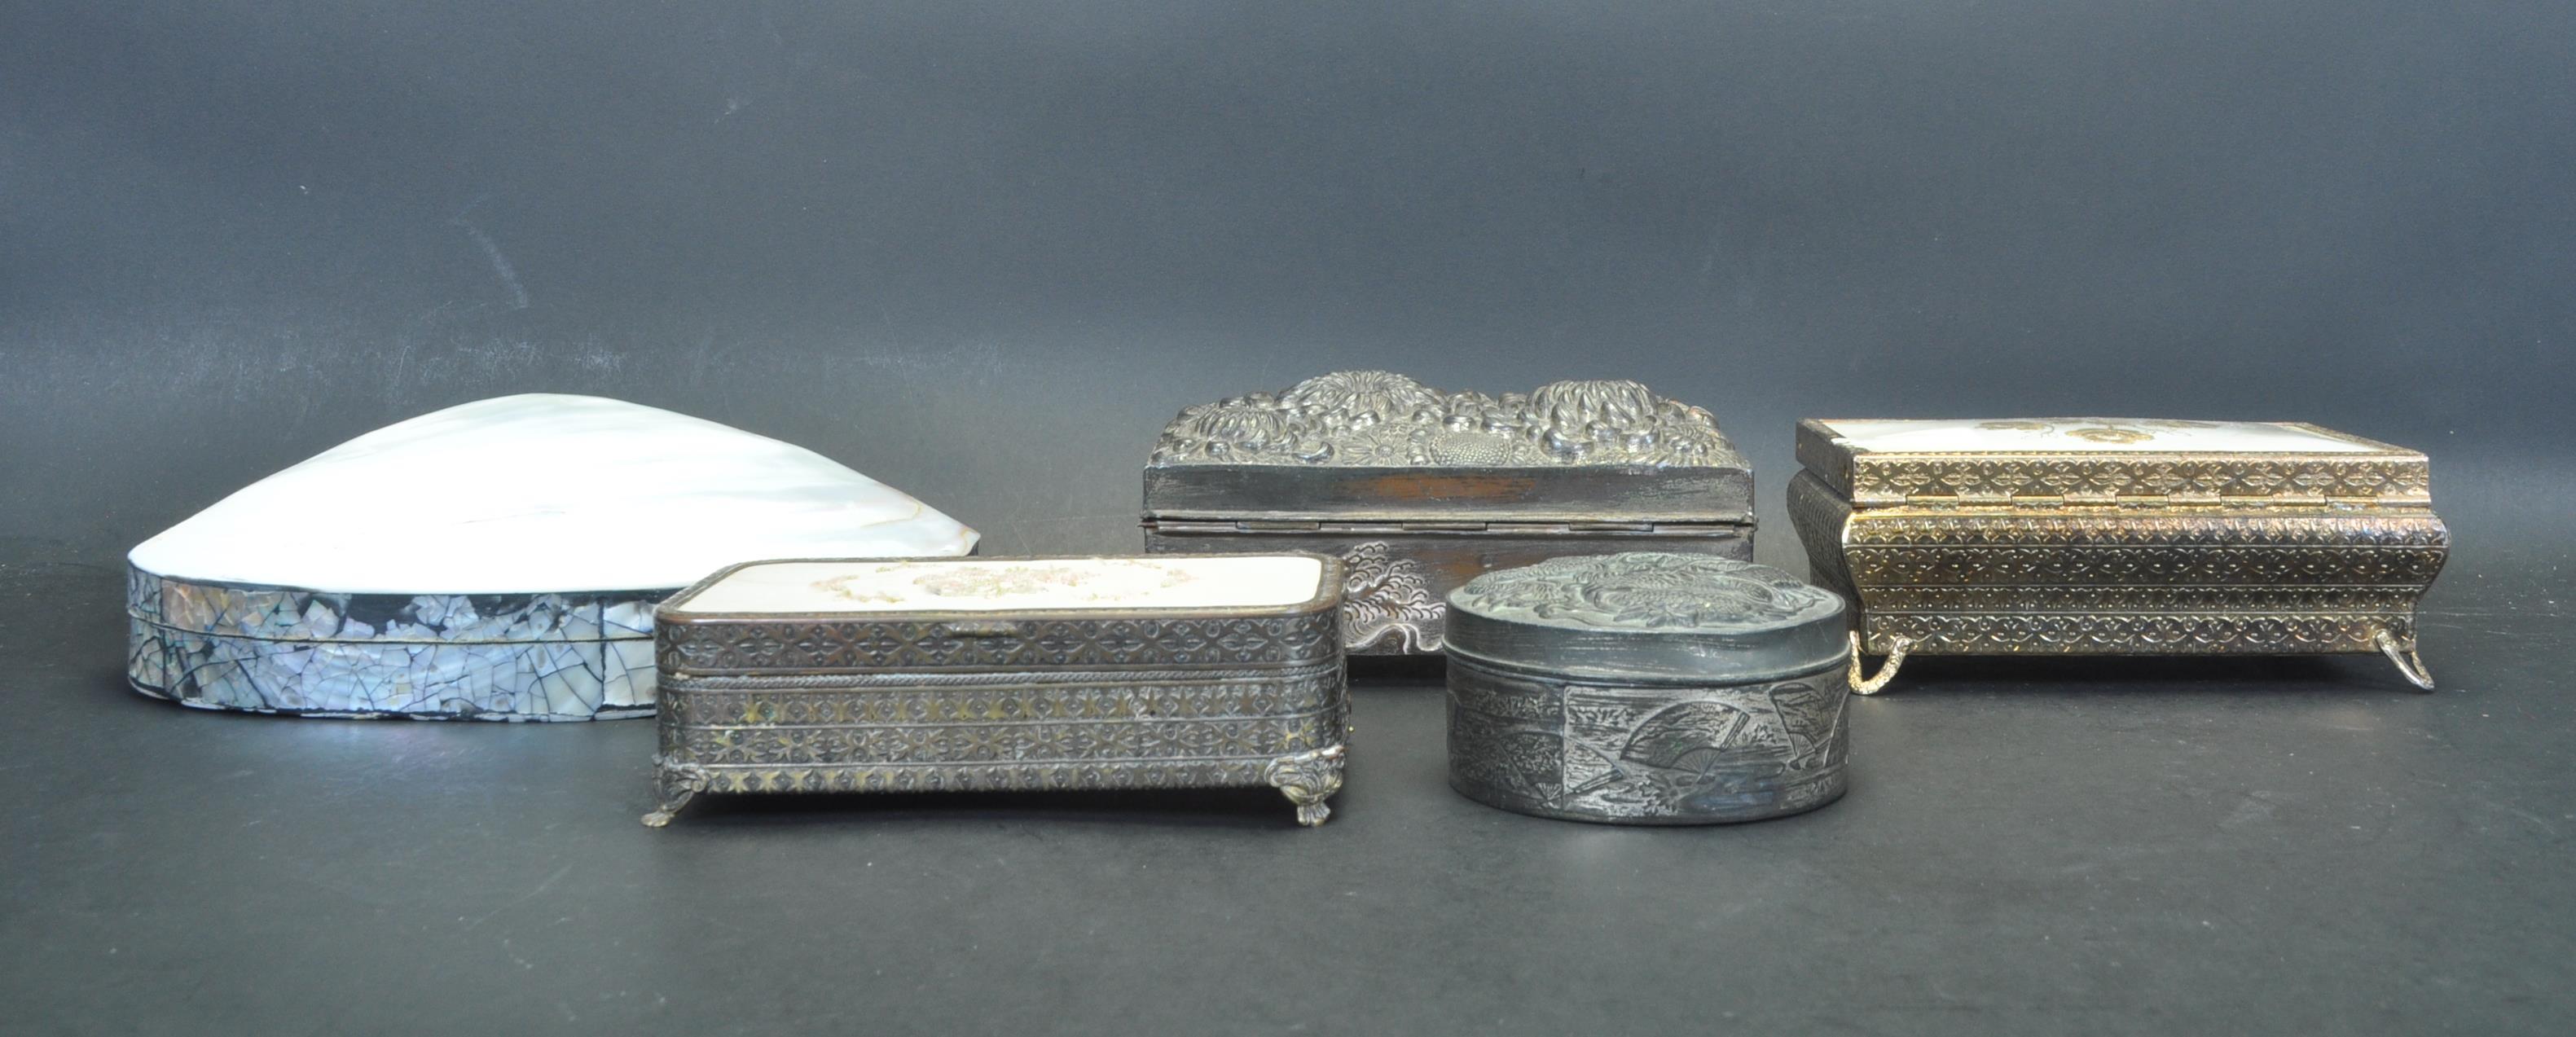 COLLECTION OF VINTAGE 20TH CENTURY JEWELLERY BOXES